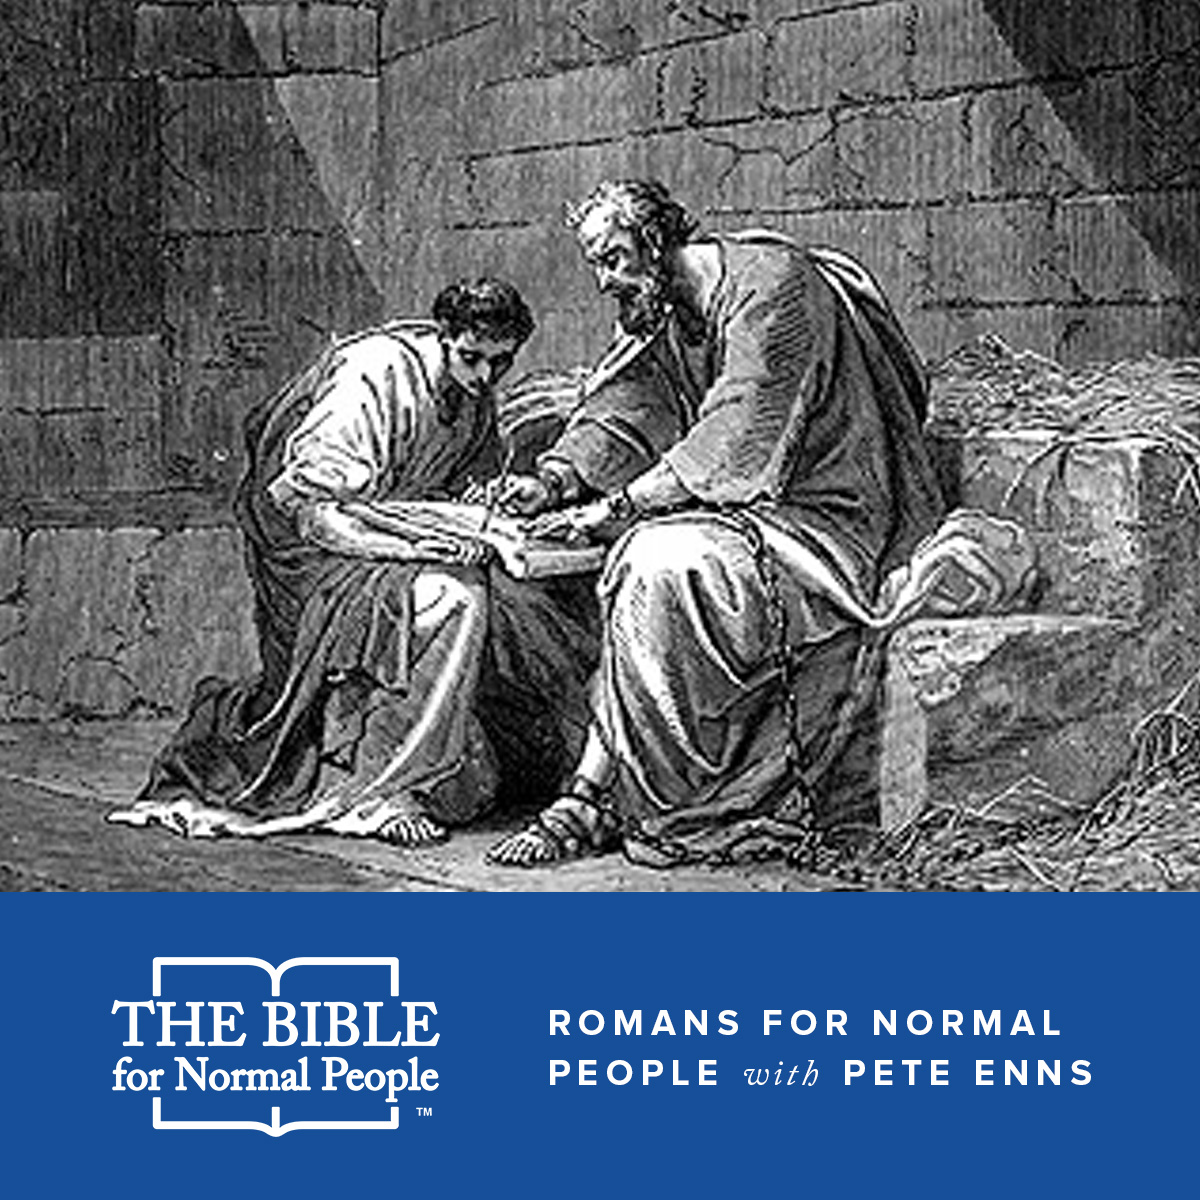 Romans for Normal People with Pete Enns